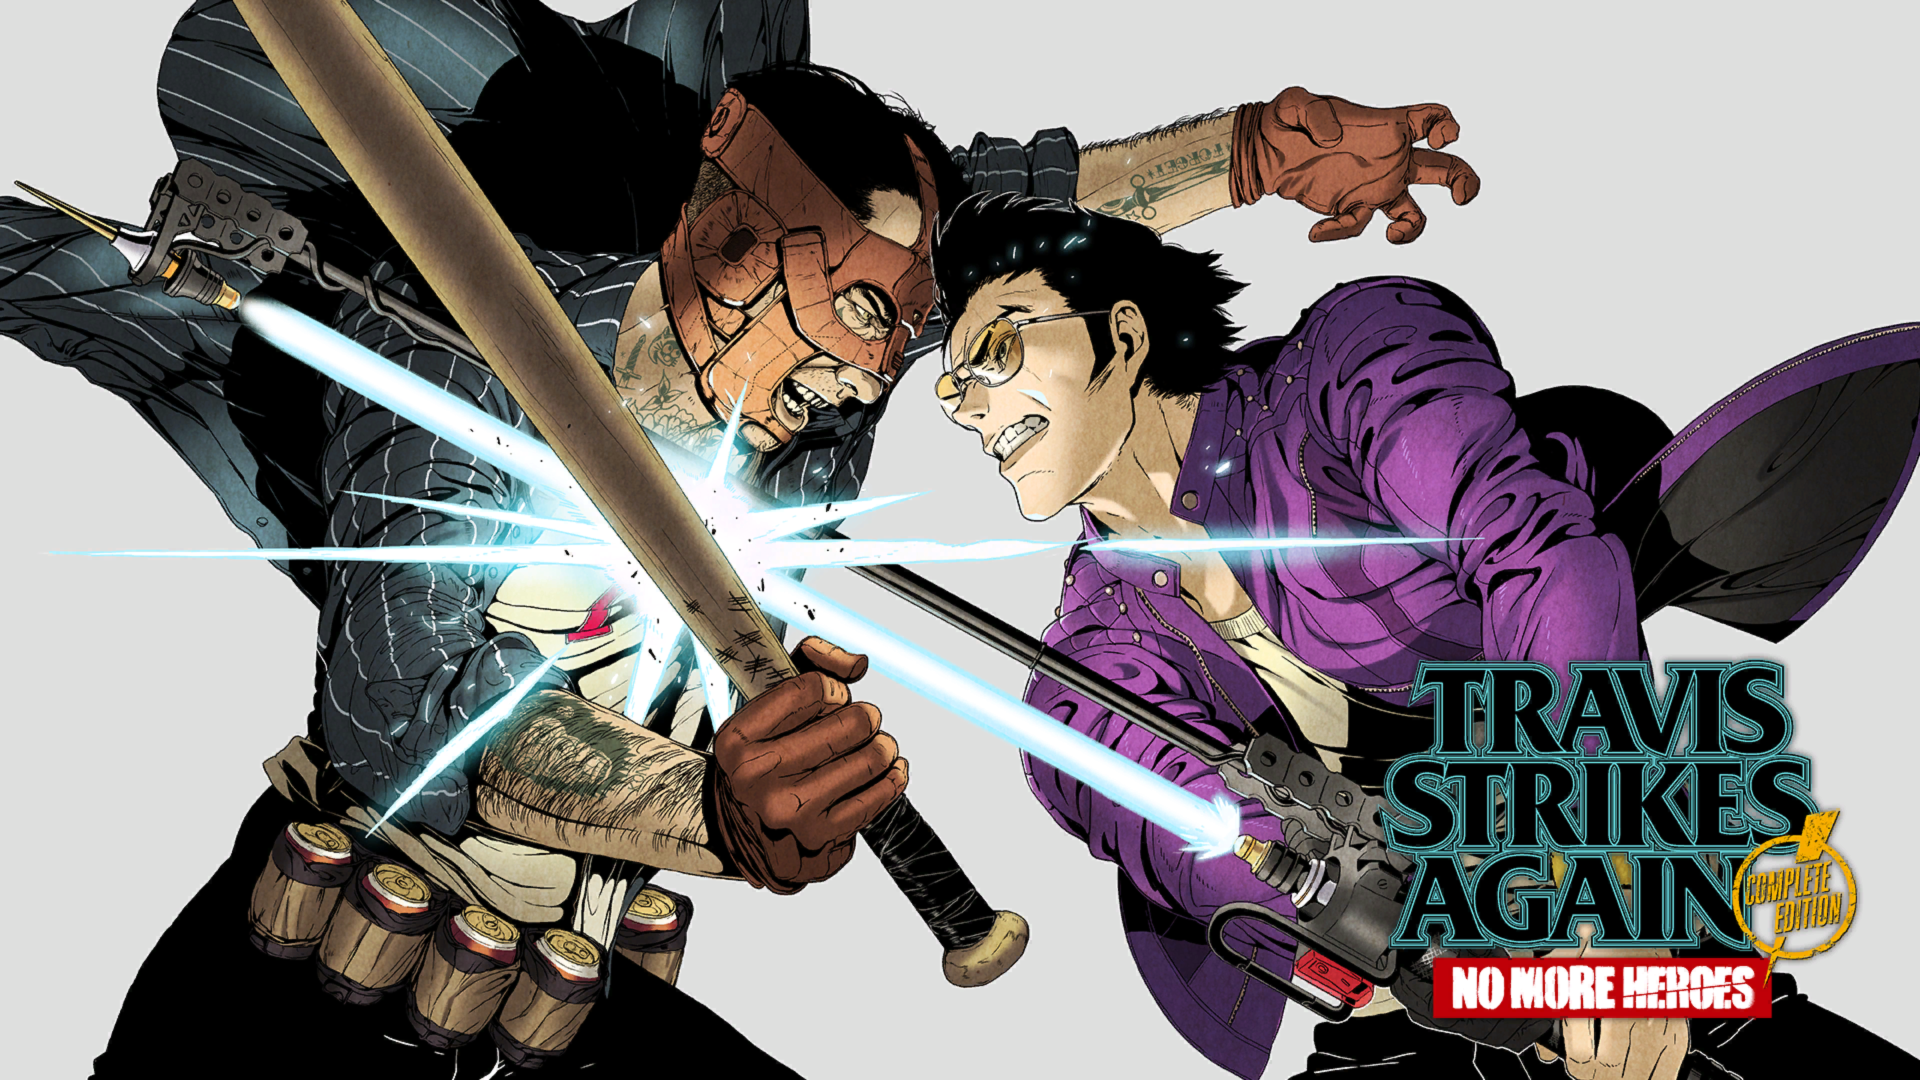 Travis Strikes Again No More Heroes PS4 Review #1